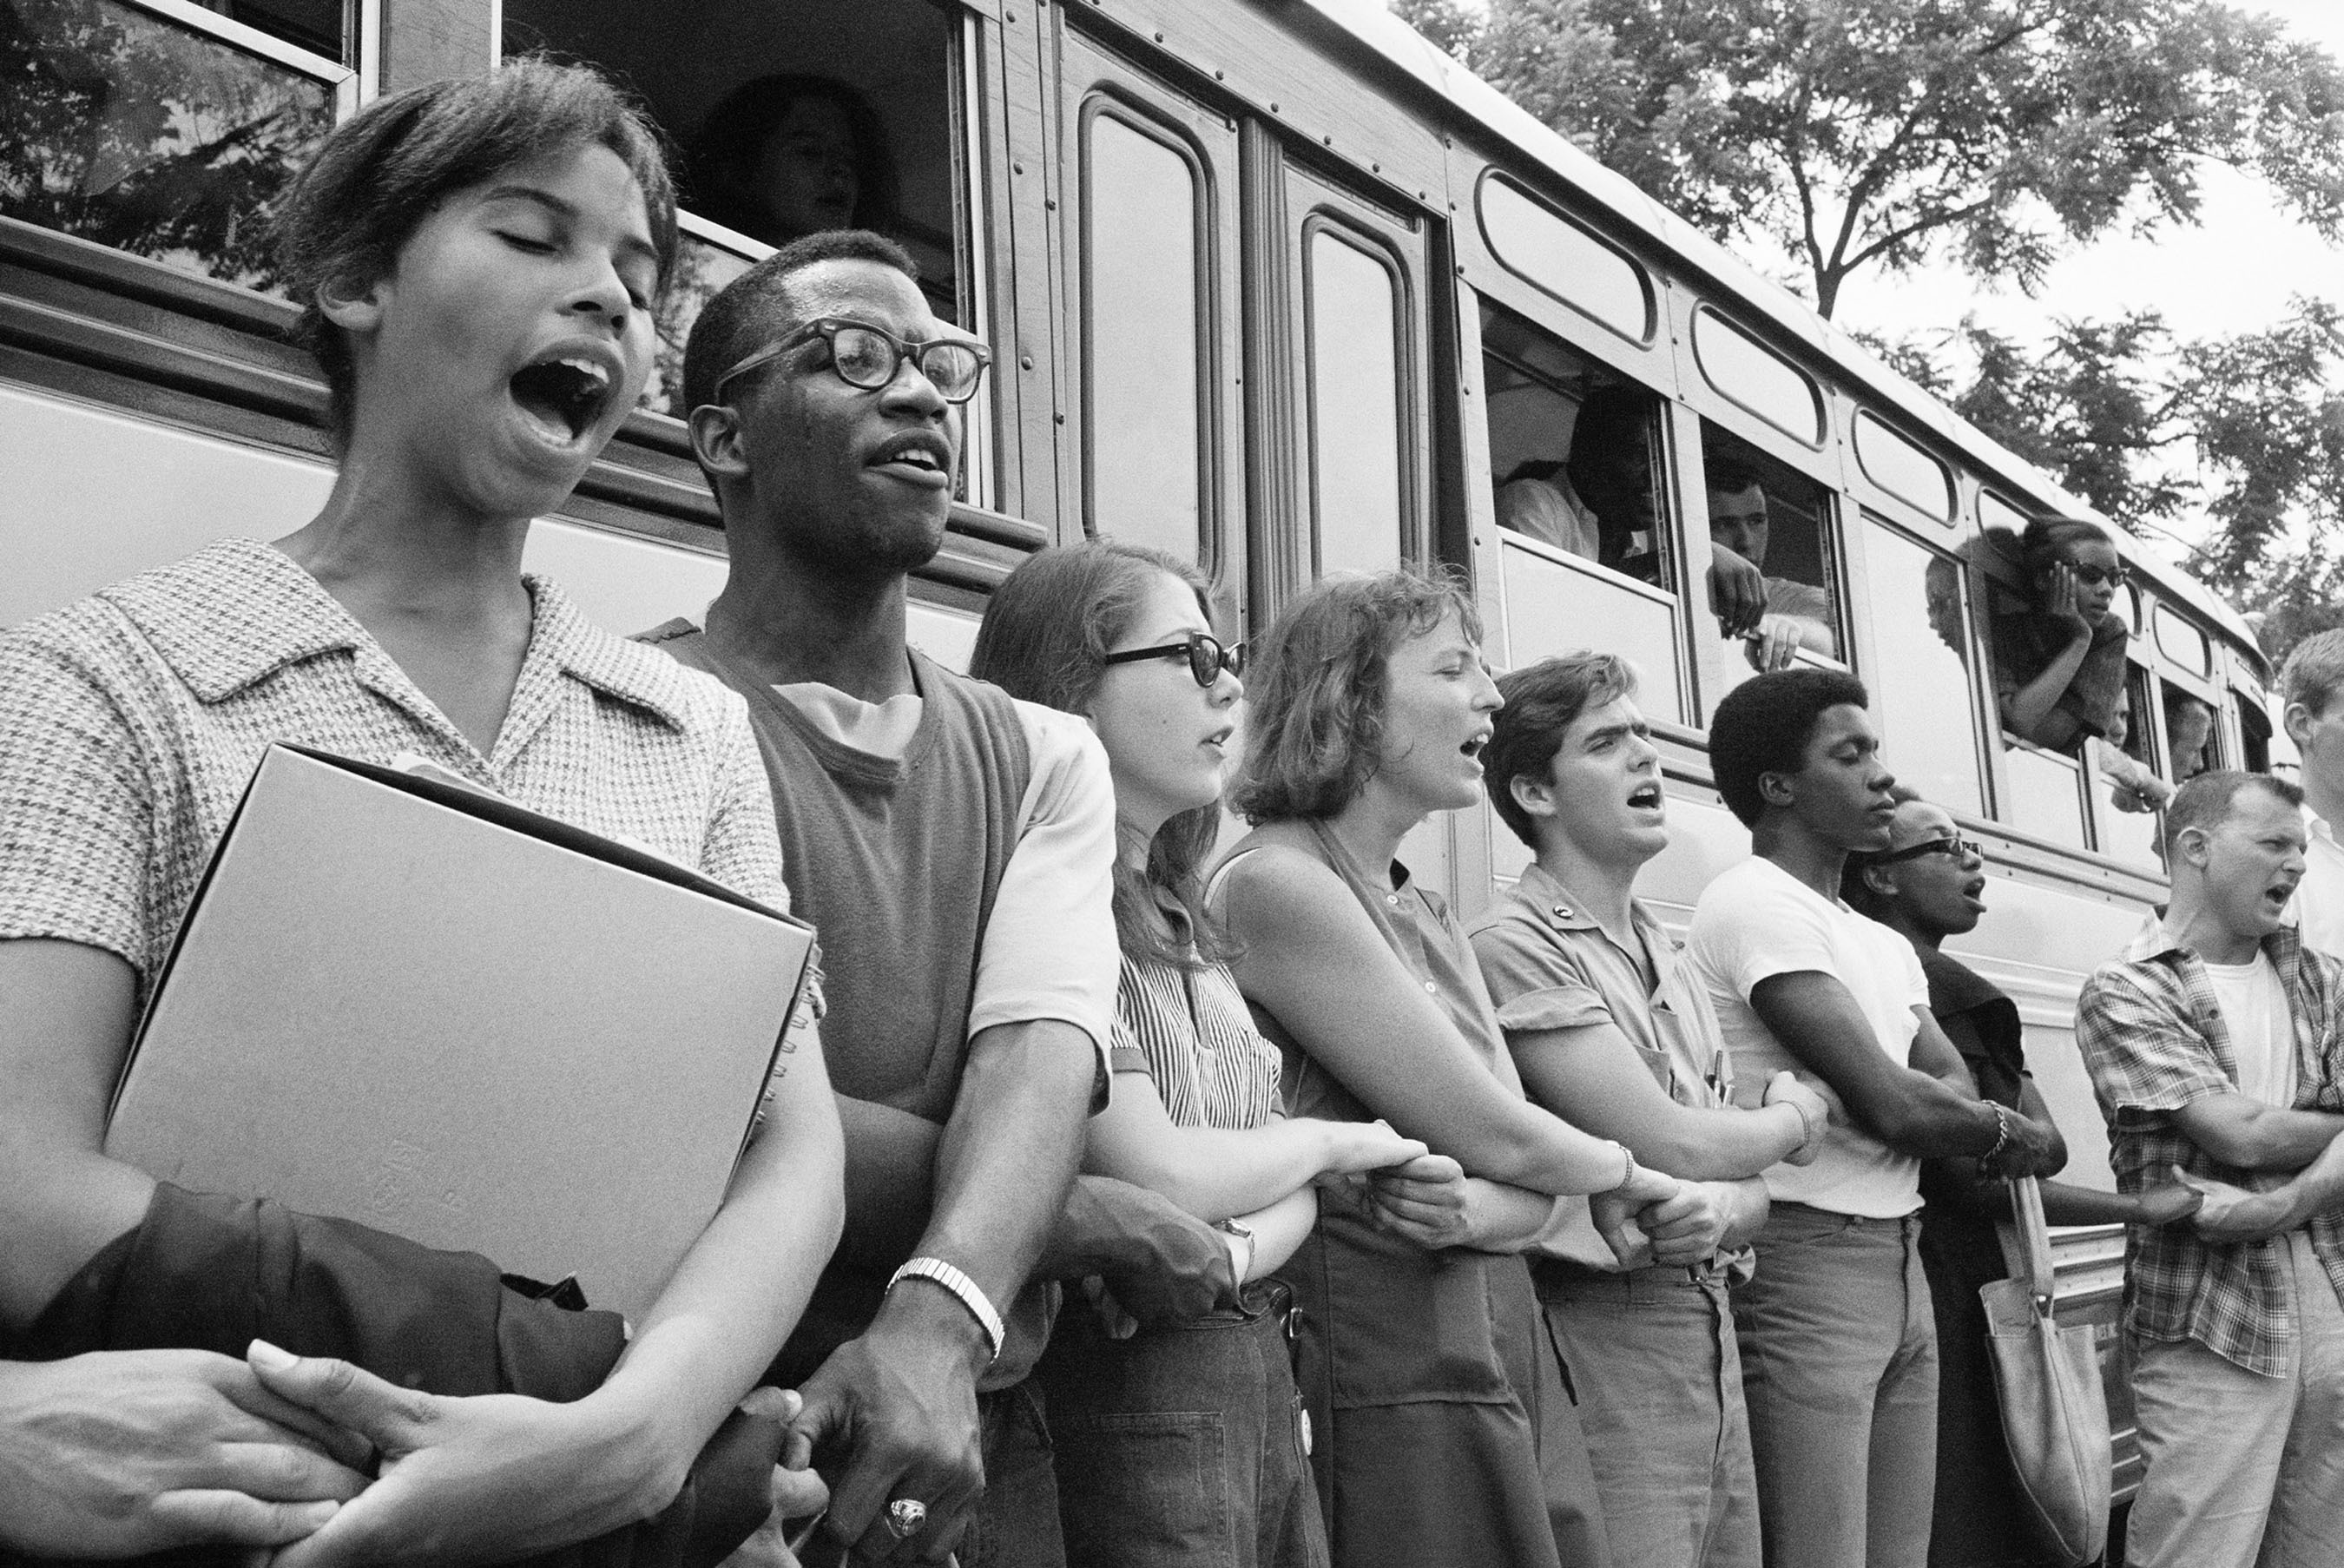 Student civil rights activists join hands and sing as they prepare to leave Ohio to register black voters in Mississippi. The 1964 voter registration campaign was known as Freedom Summer. This image and others are now on display in a new exhibit called "1964: Civil Rights at 50" at the Newseum in Washington, D.C. Credit: Ted Polumbaum/Newseum collection. (PRNewsFoto/Newseum) (PRNewsFoto/NEWSEUM)